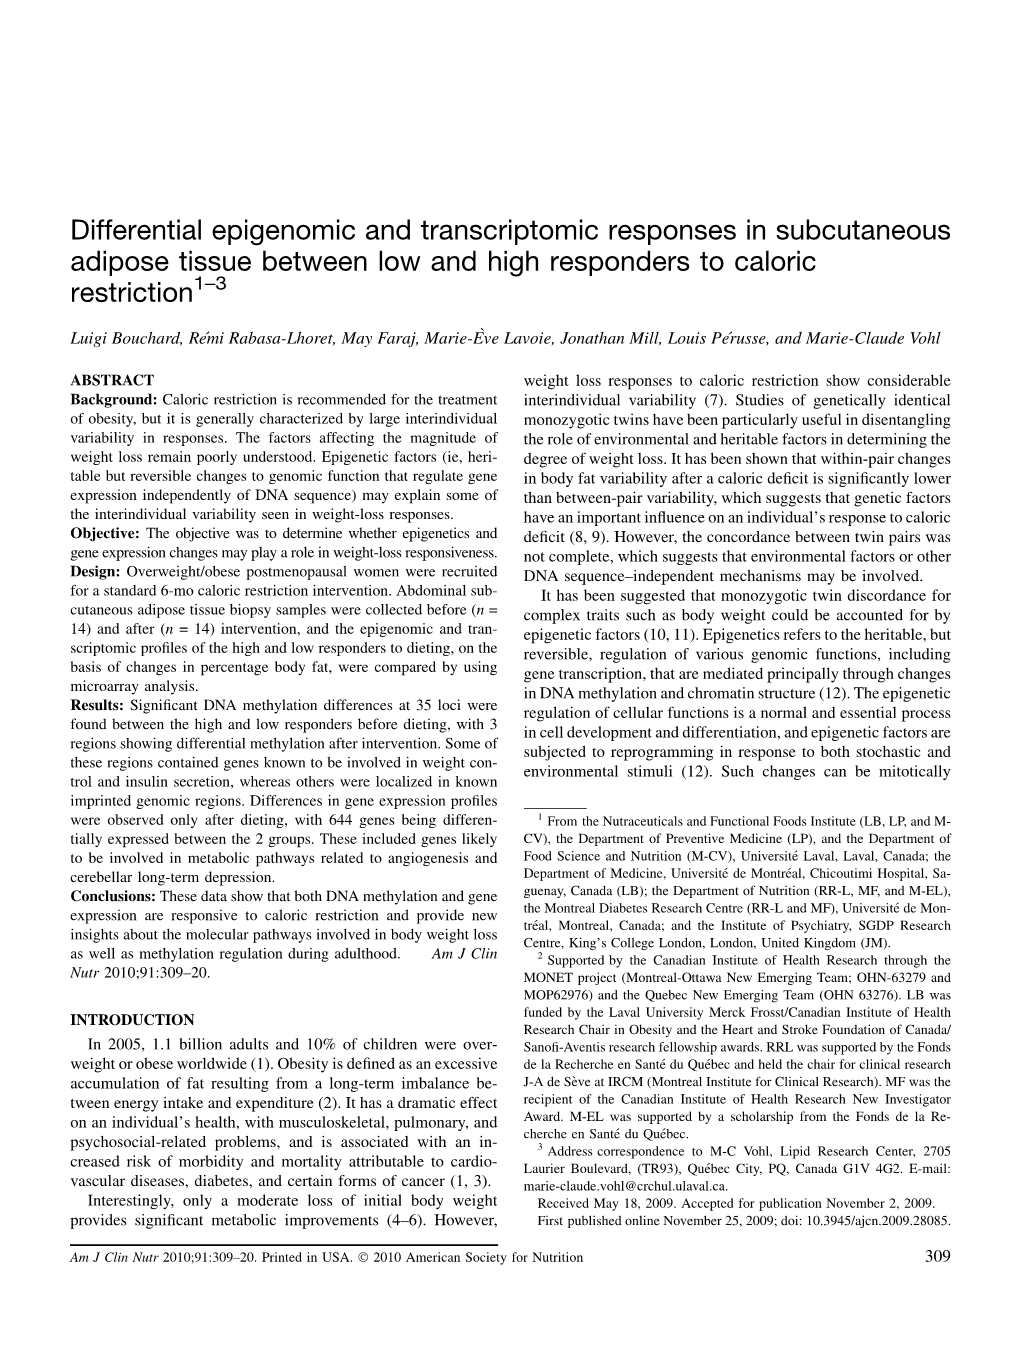 Differential Epigenomic and Transcriptomic Responses in Subcutaneous Adipose Tissue Between Low and High Responders to Caloric Restriction1–3